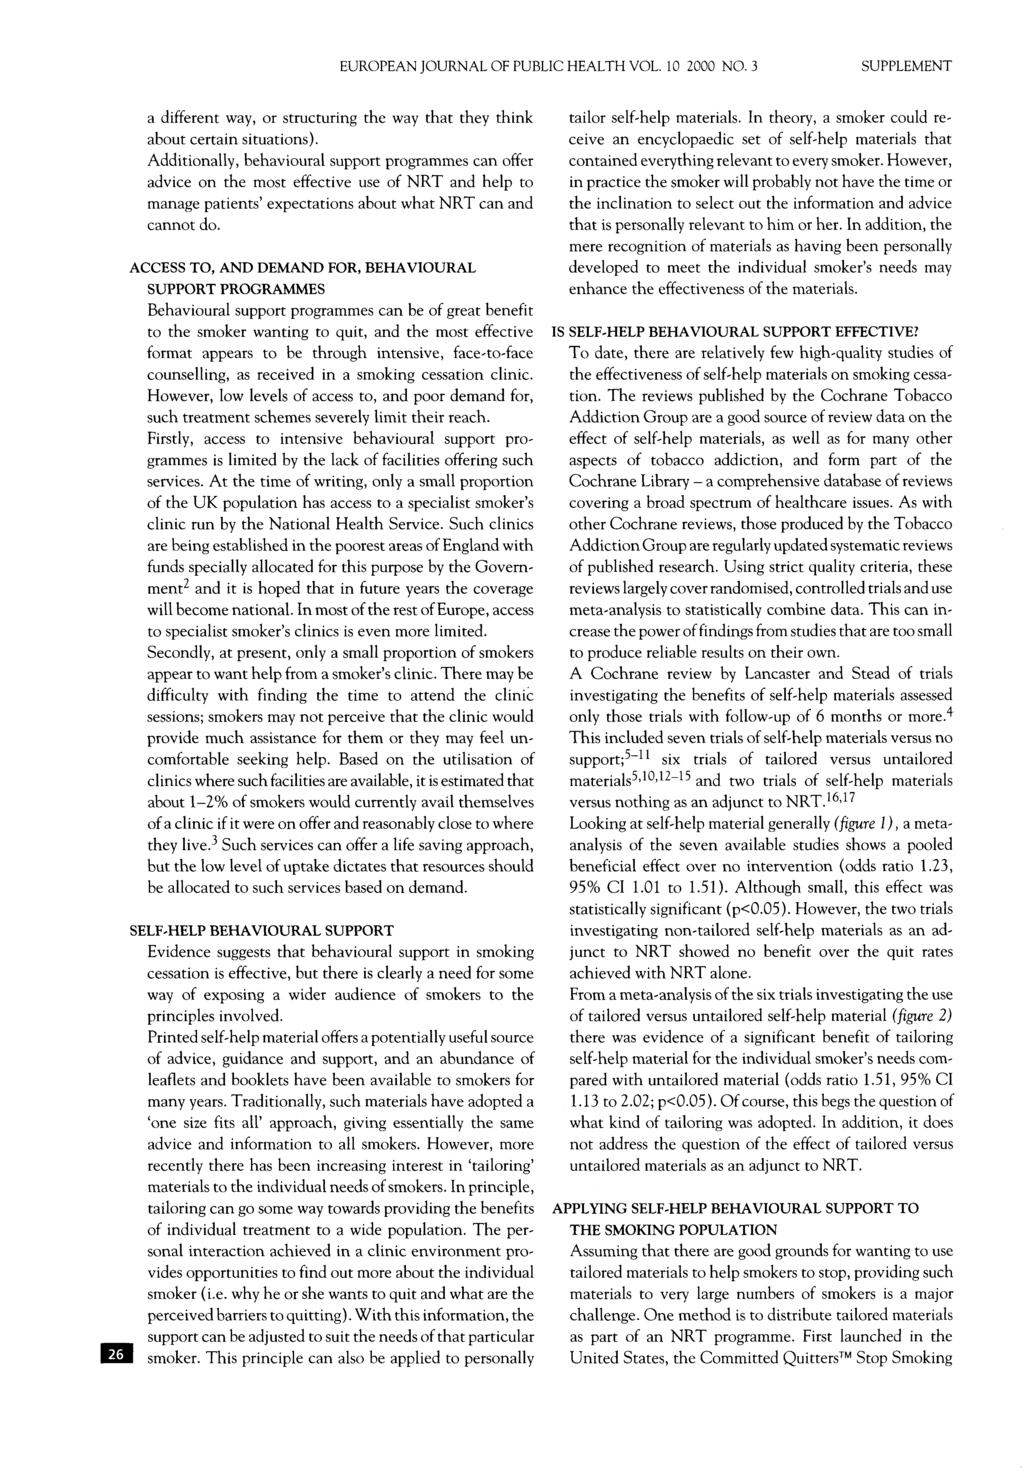 EUROPEAN JOURNAL OF PUBLIC HEALTH VOL. 10 2000 NO. 3 SUPPLEMENT a different way, or structuring the way that they think about certain situations).